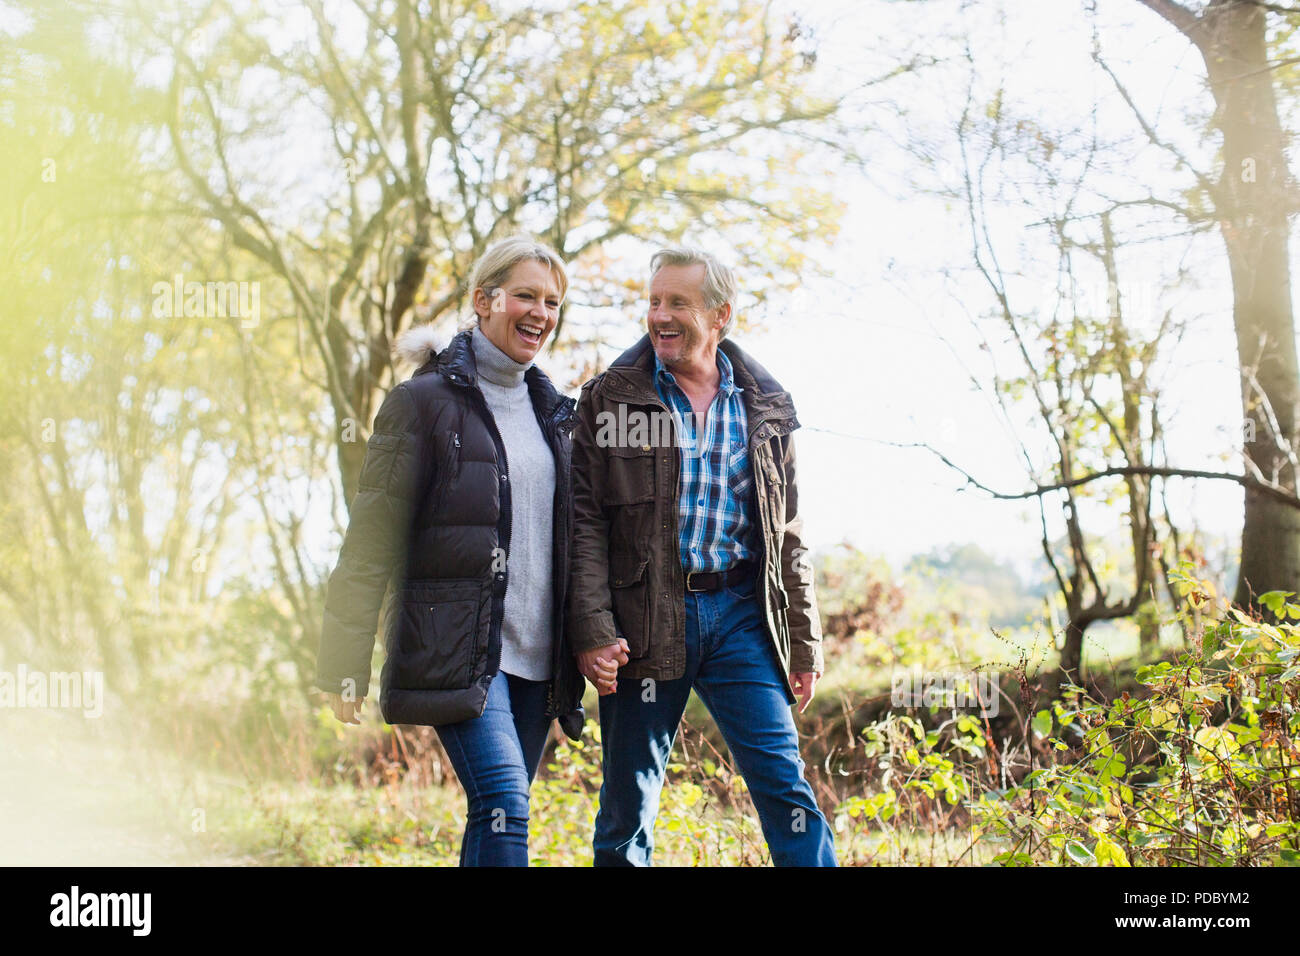 Senior couple holding hands, walking in sunny autumn park Banque D'Images